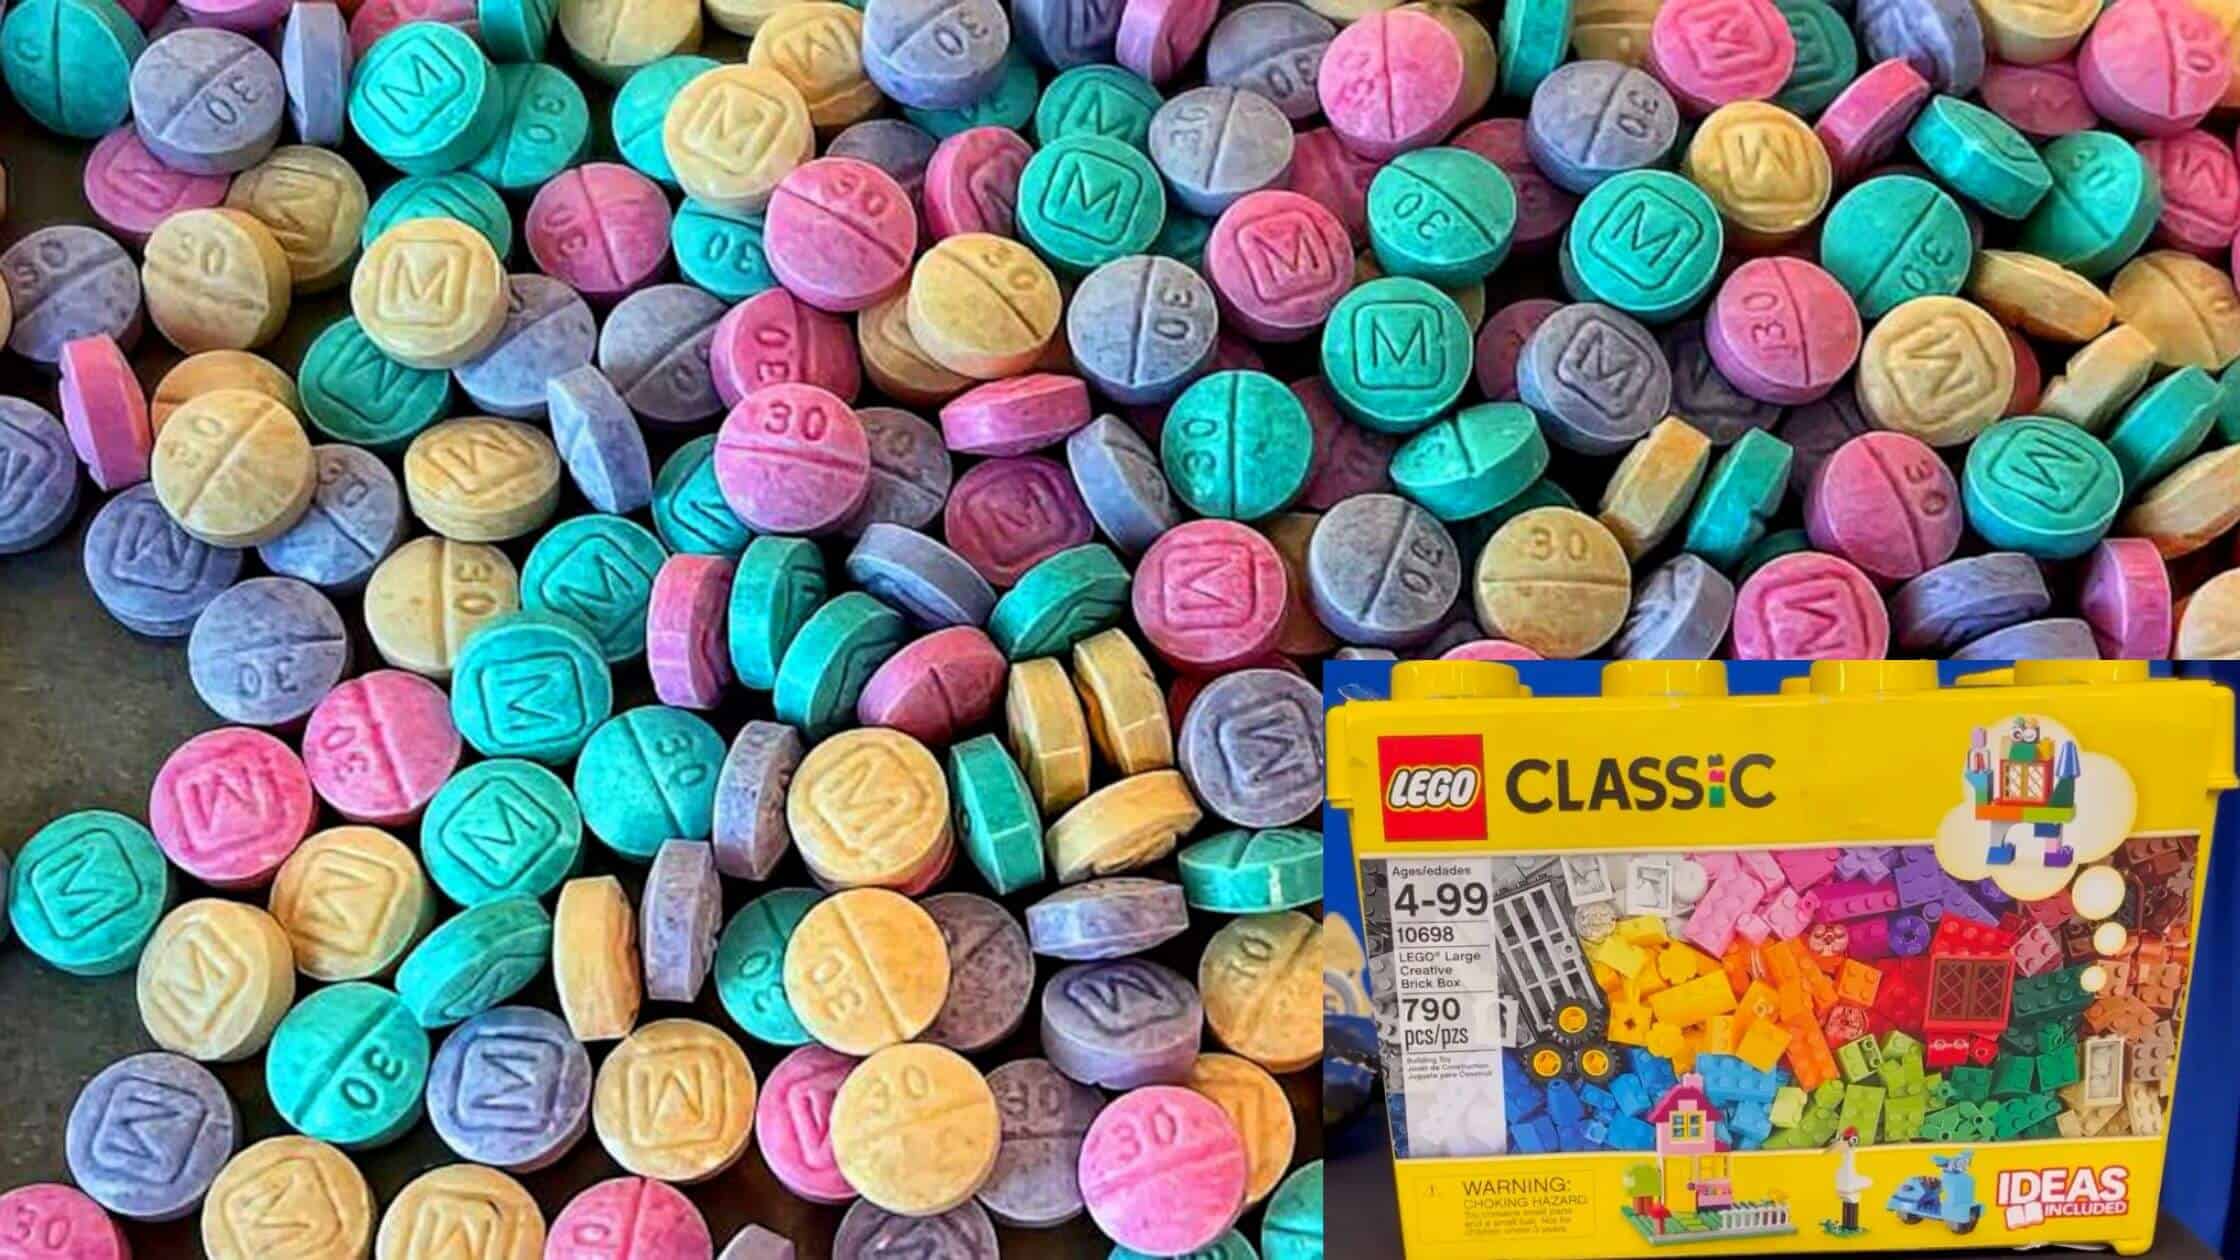 New York Officials Discover Rainbow Fentanyl Tablets In A Lego Box